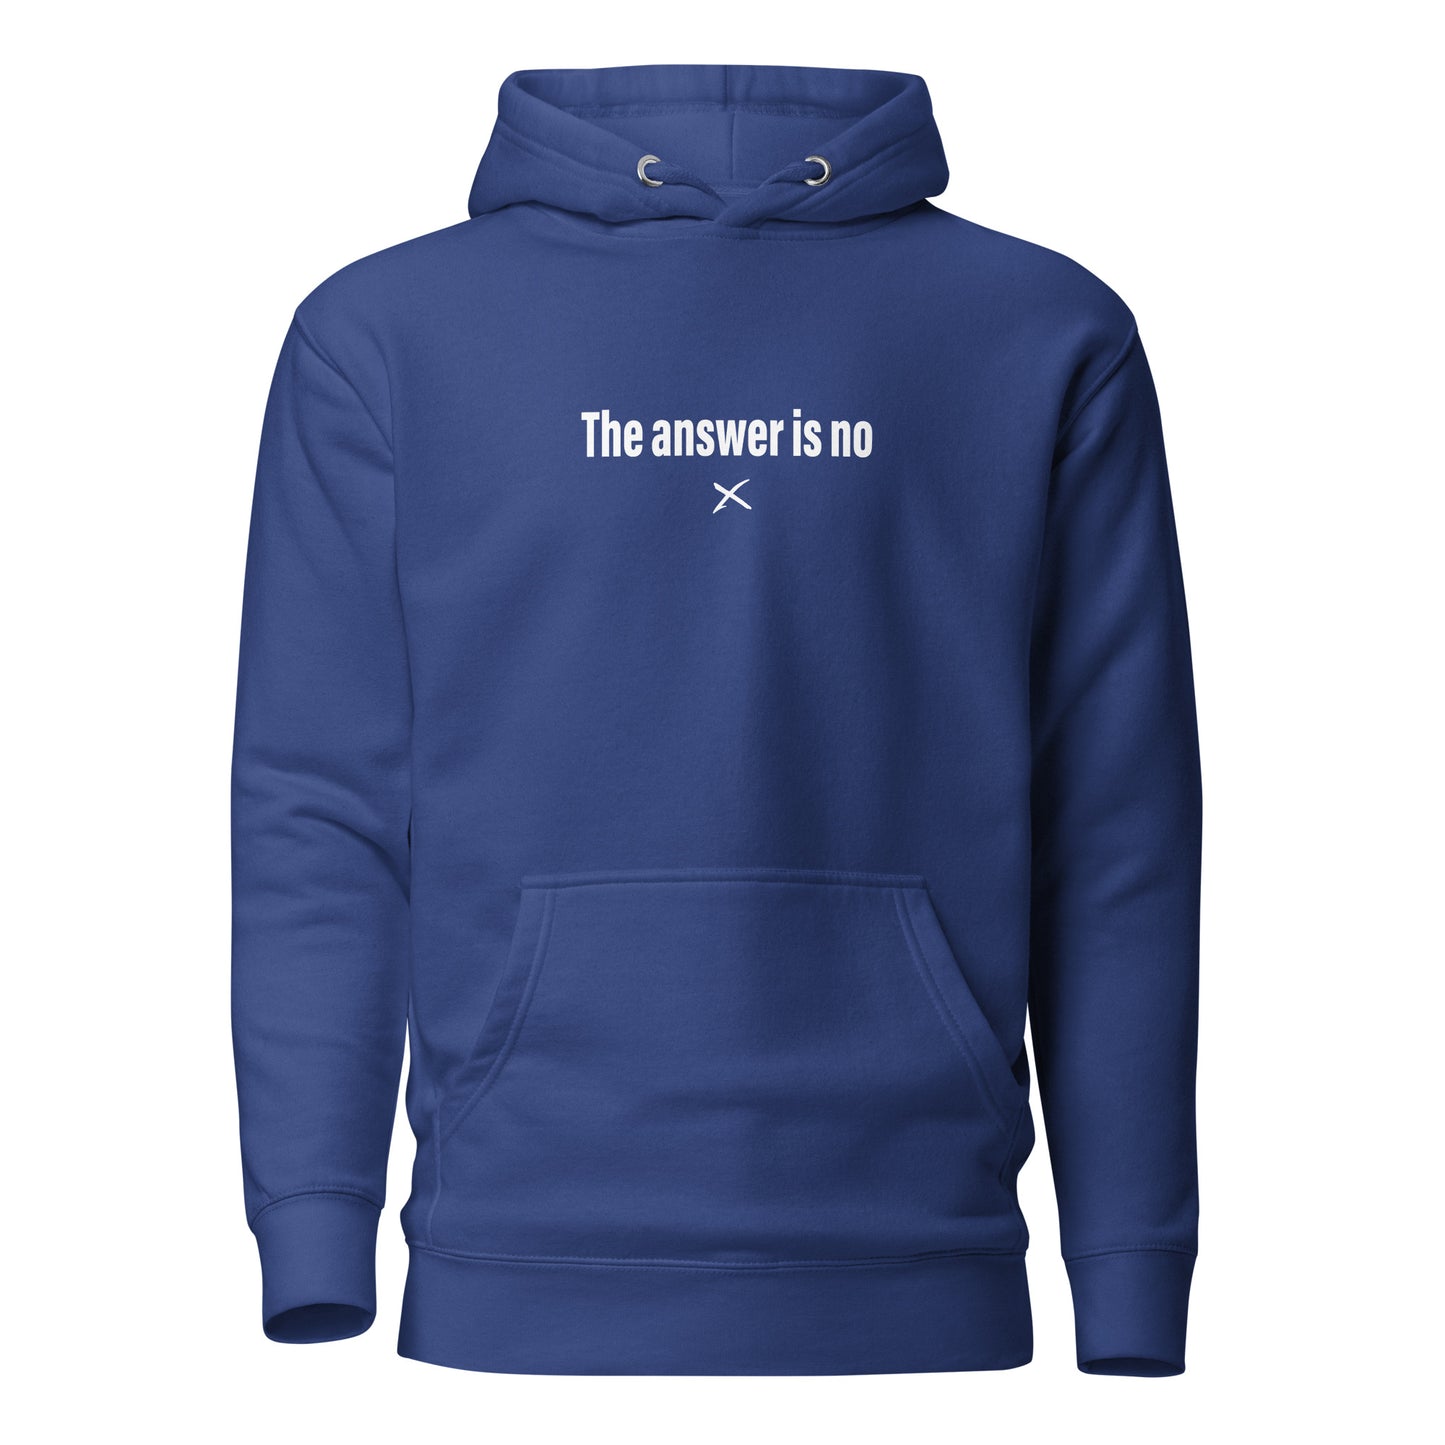 The answer is no - Hoodie